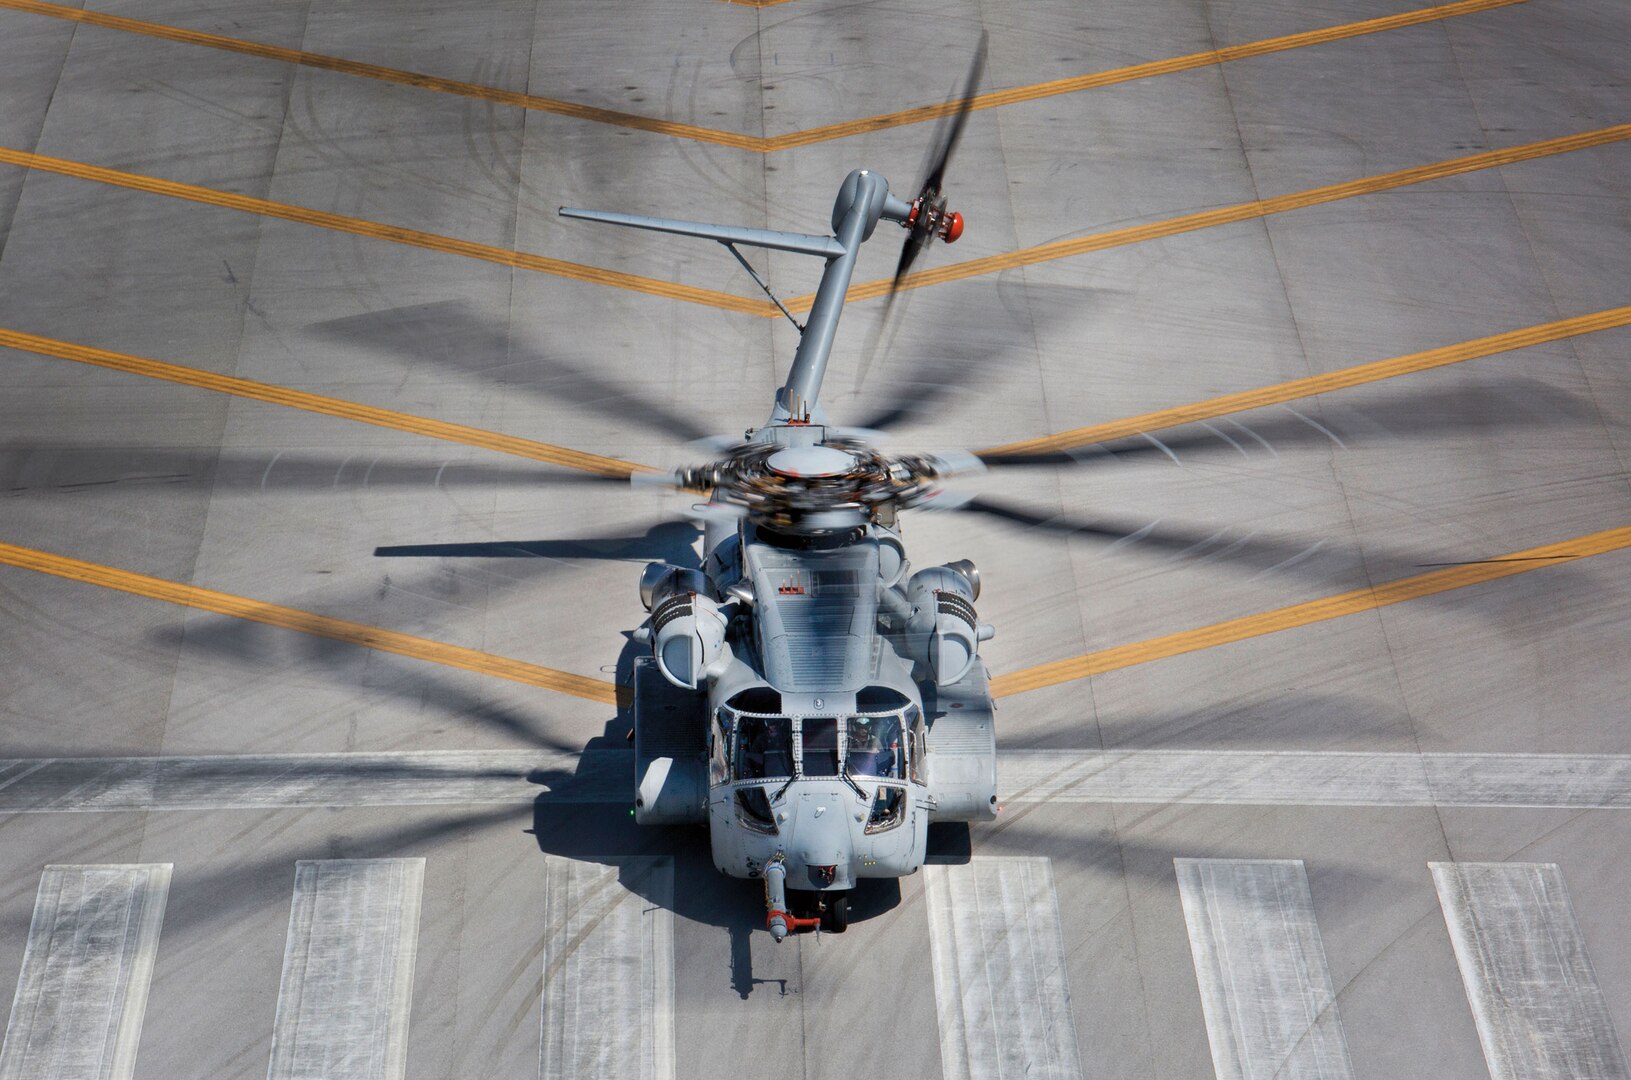 Scheduled to completely replace CH-53E Super Stallion by 2030, CH-53K King Stallion lands after test flight in West Palm Beach, Florida, March 22, 2017 (U.S. Marine Corps/Molly Hampton)